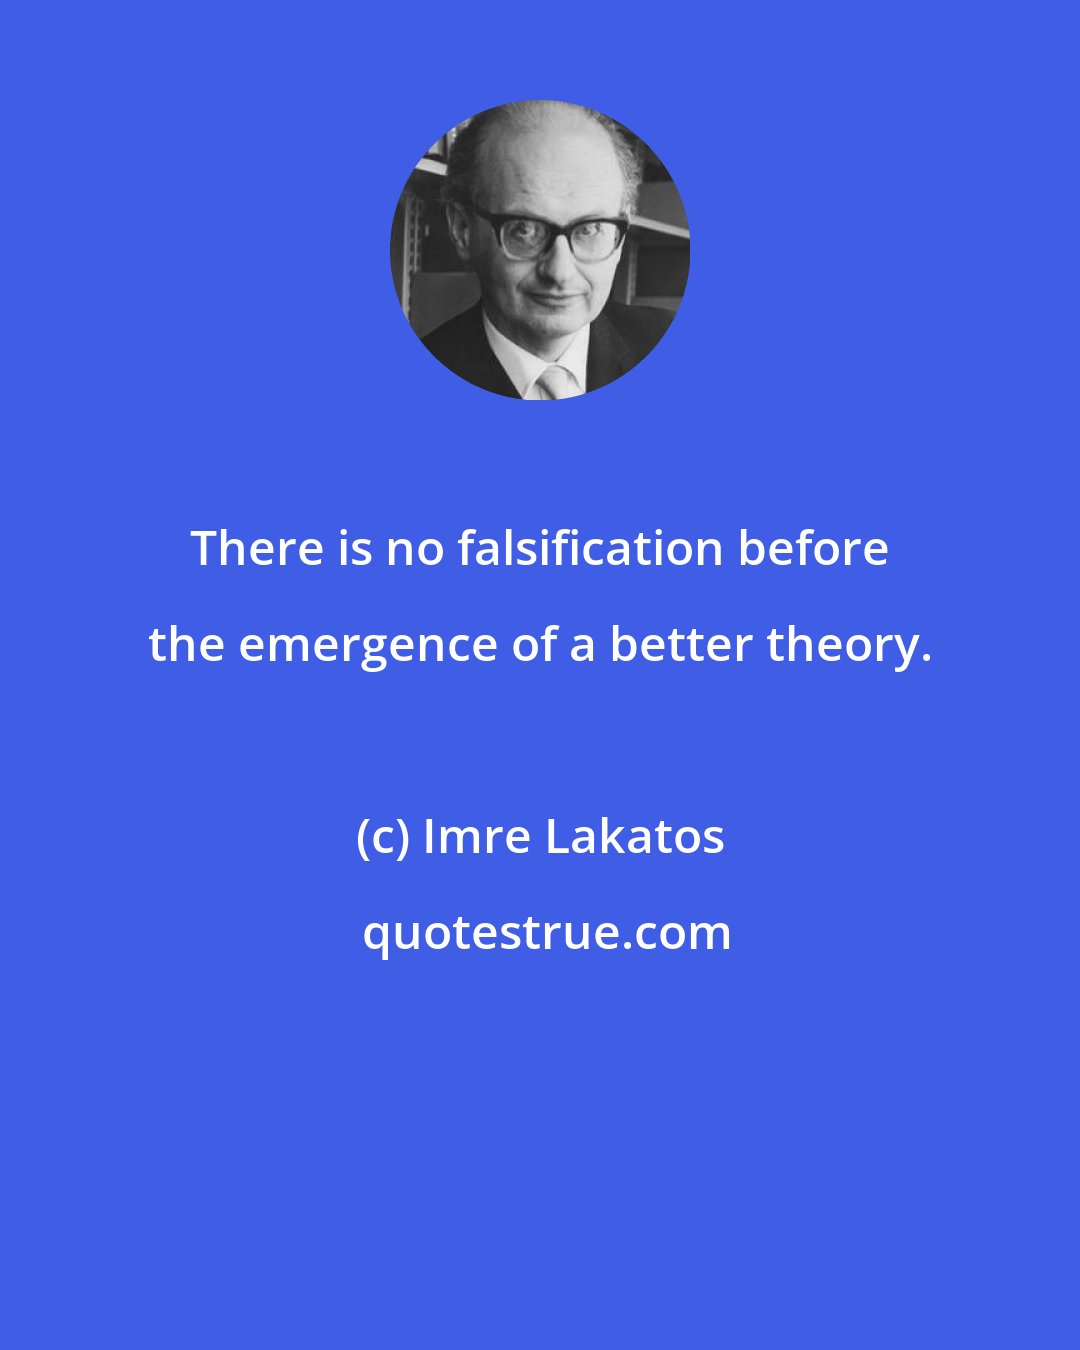 Imre Lakatos: There is no falsification before the emergence of a better theory.